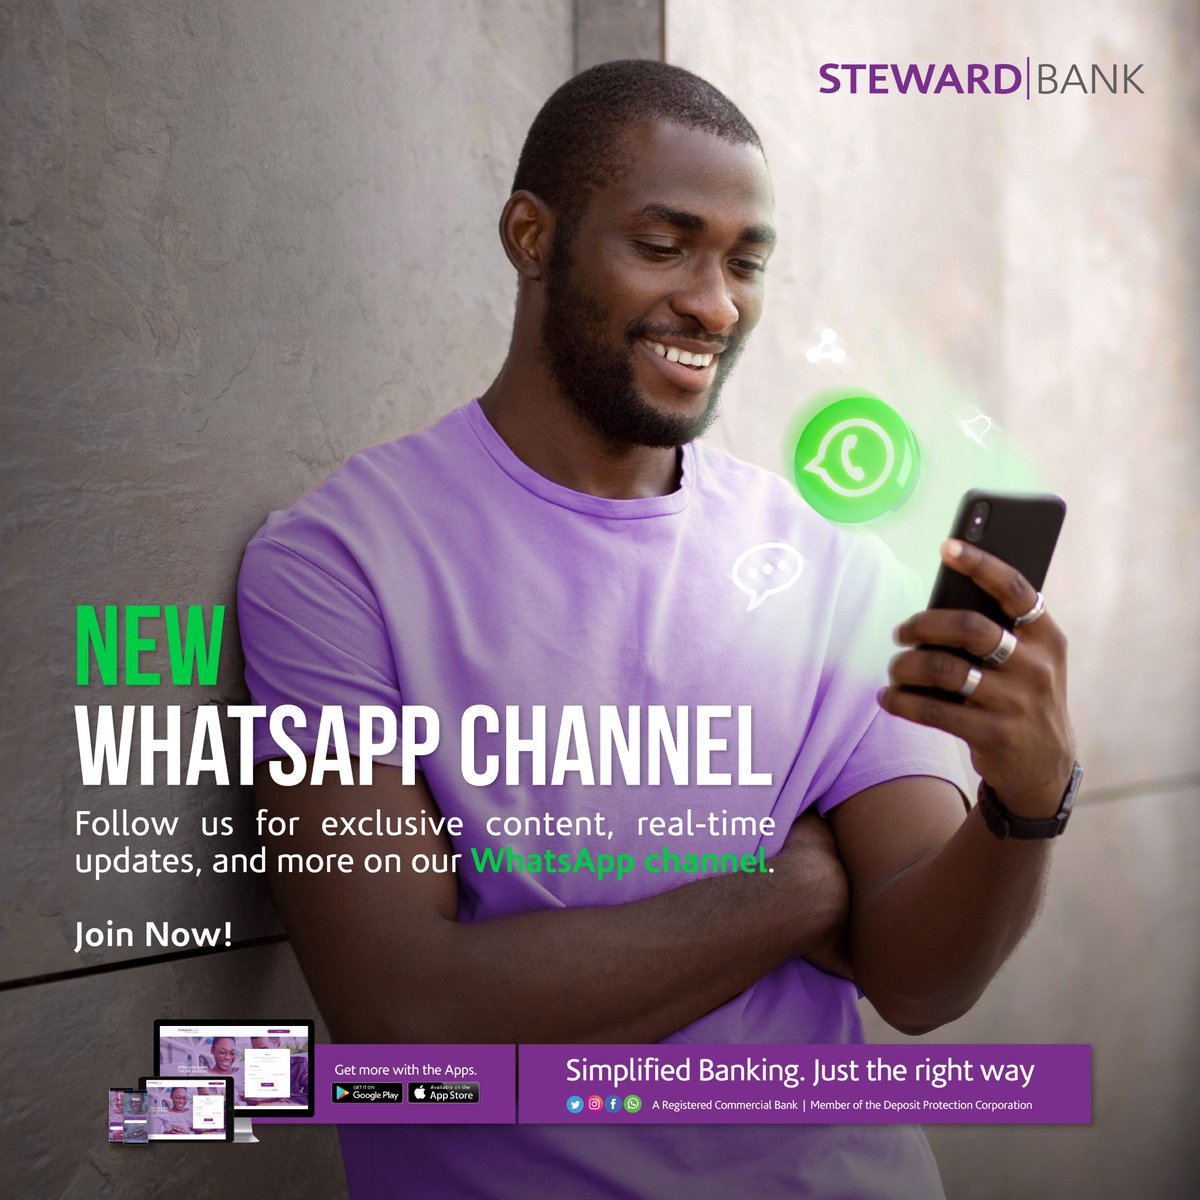 Follow us for exclusive content, real-time updates, and more on our WhatsApp channel. Follow us here: whatsapp.com/channel/0029Va… #WeVeGotYou